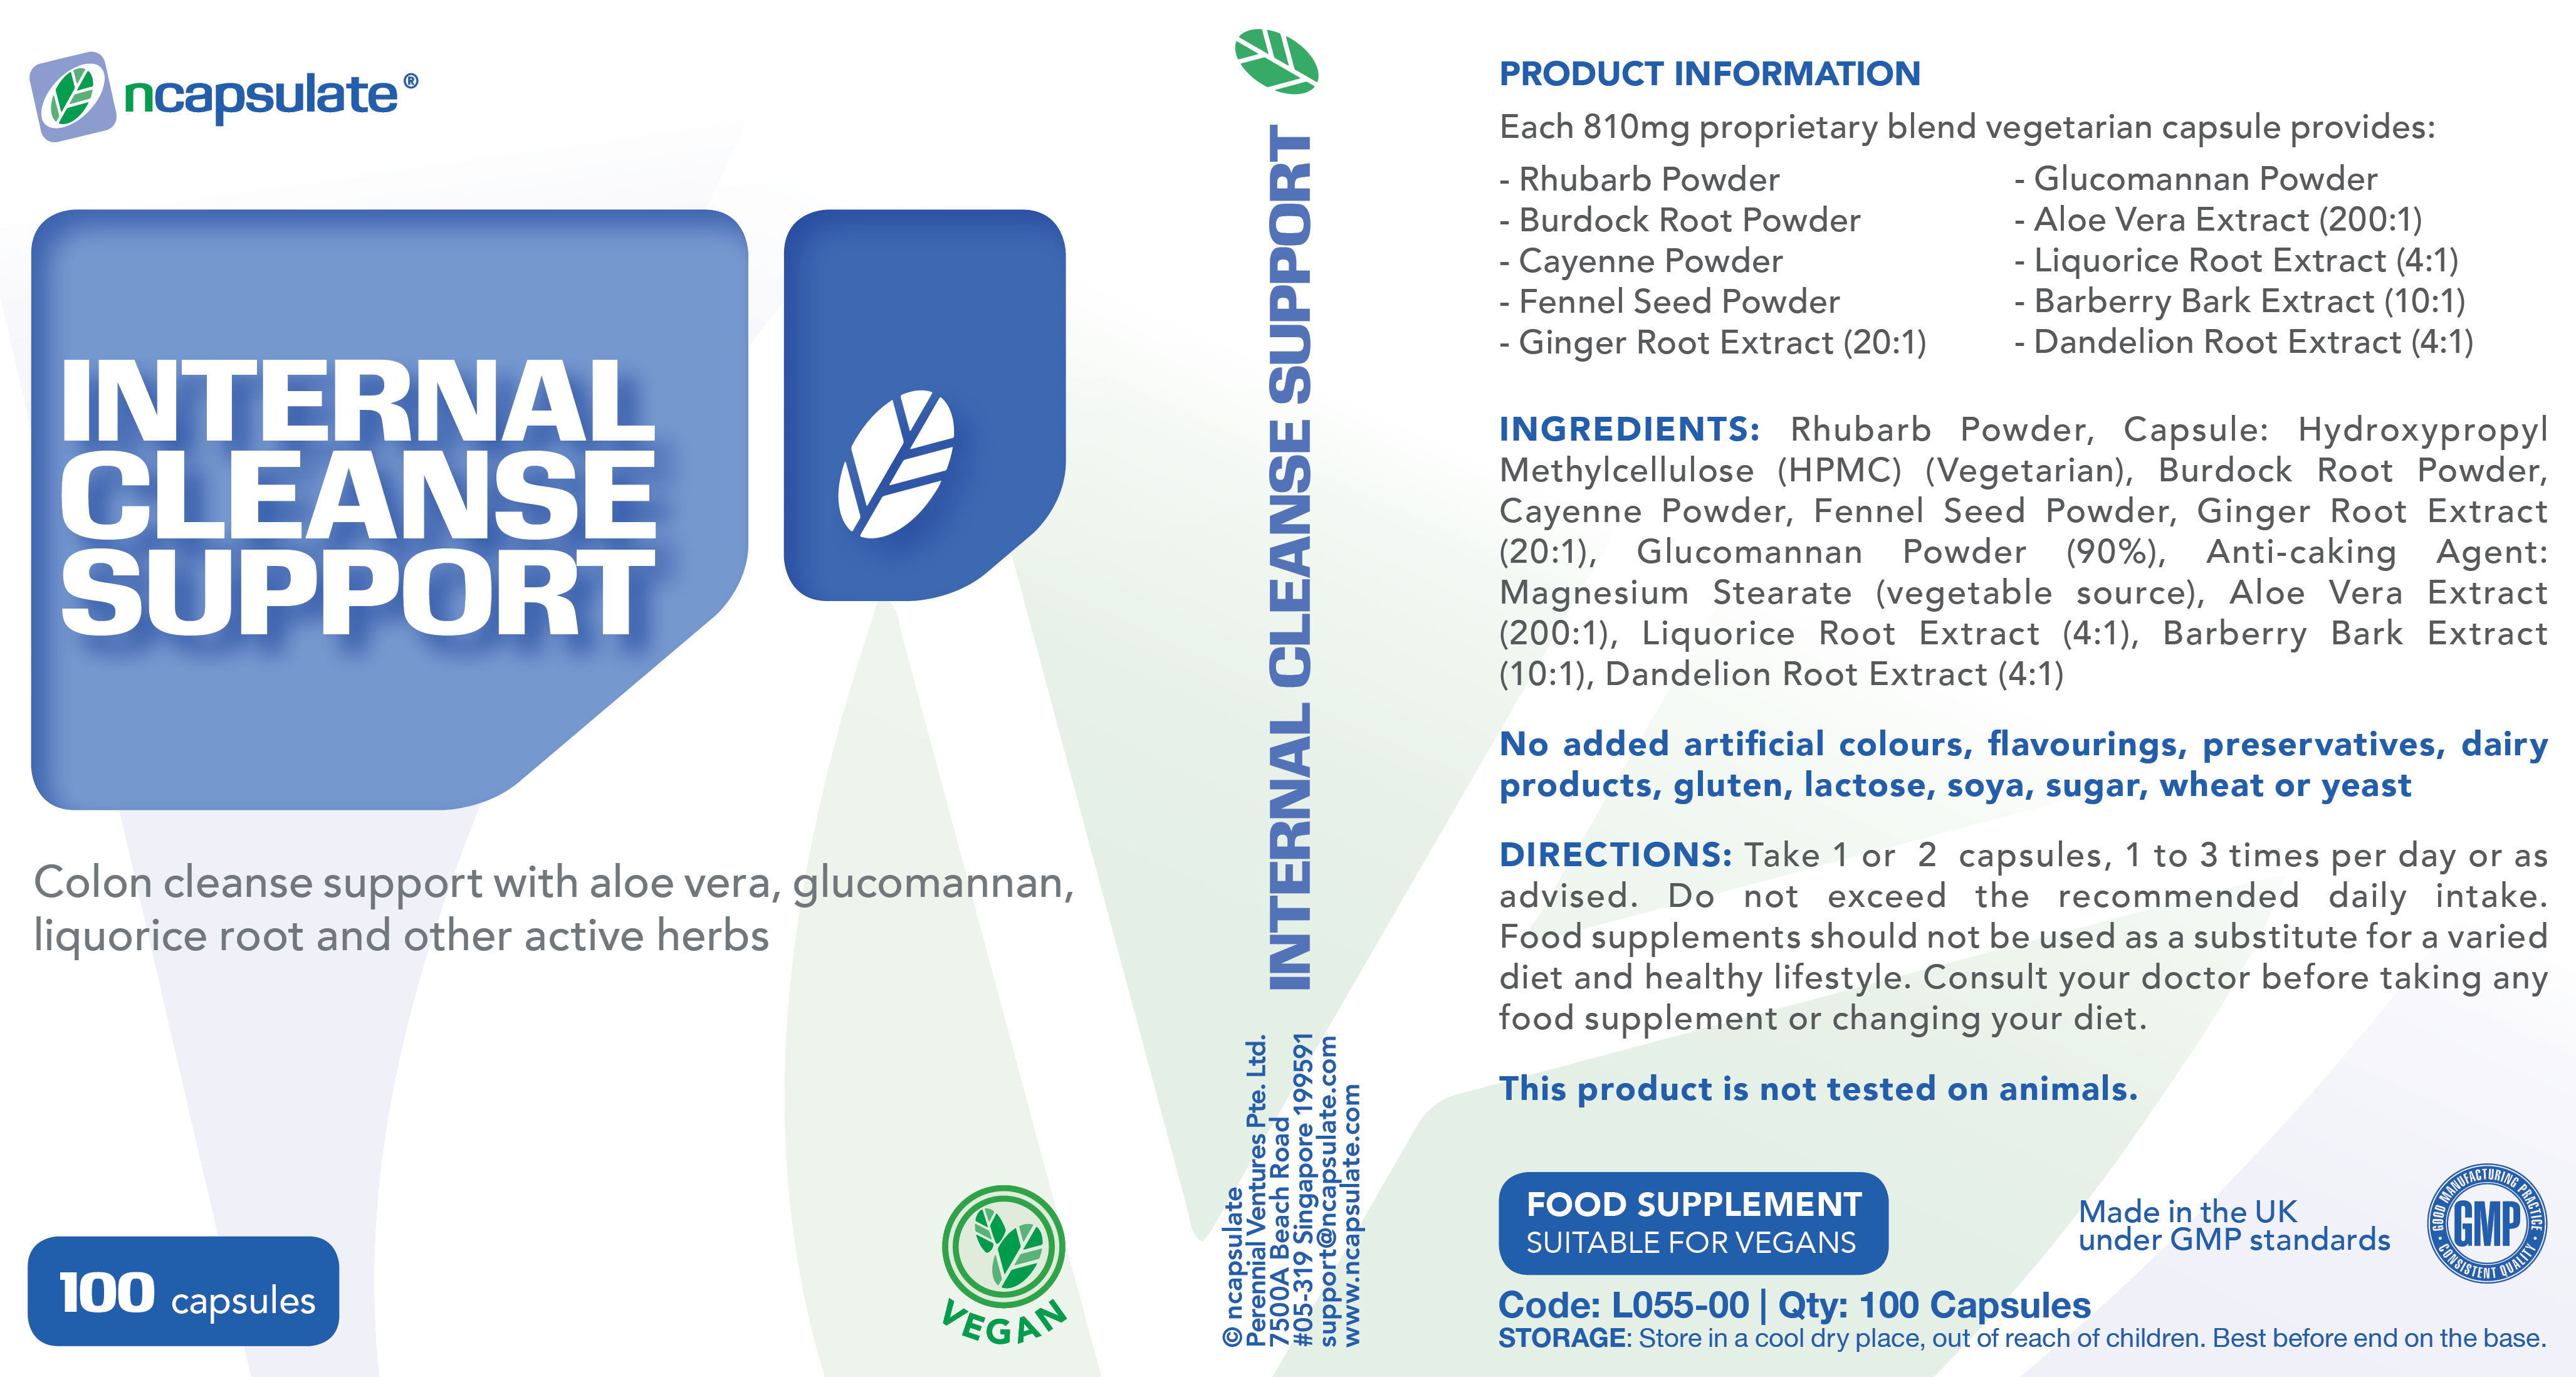 ncapsulate® INTERNAL CLEANSE SUPPORT Premium Health Supplement Product Label